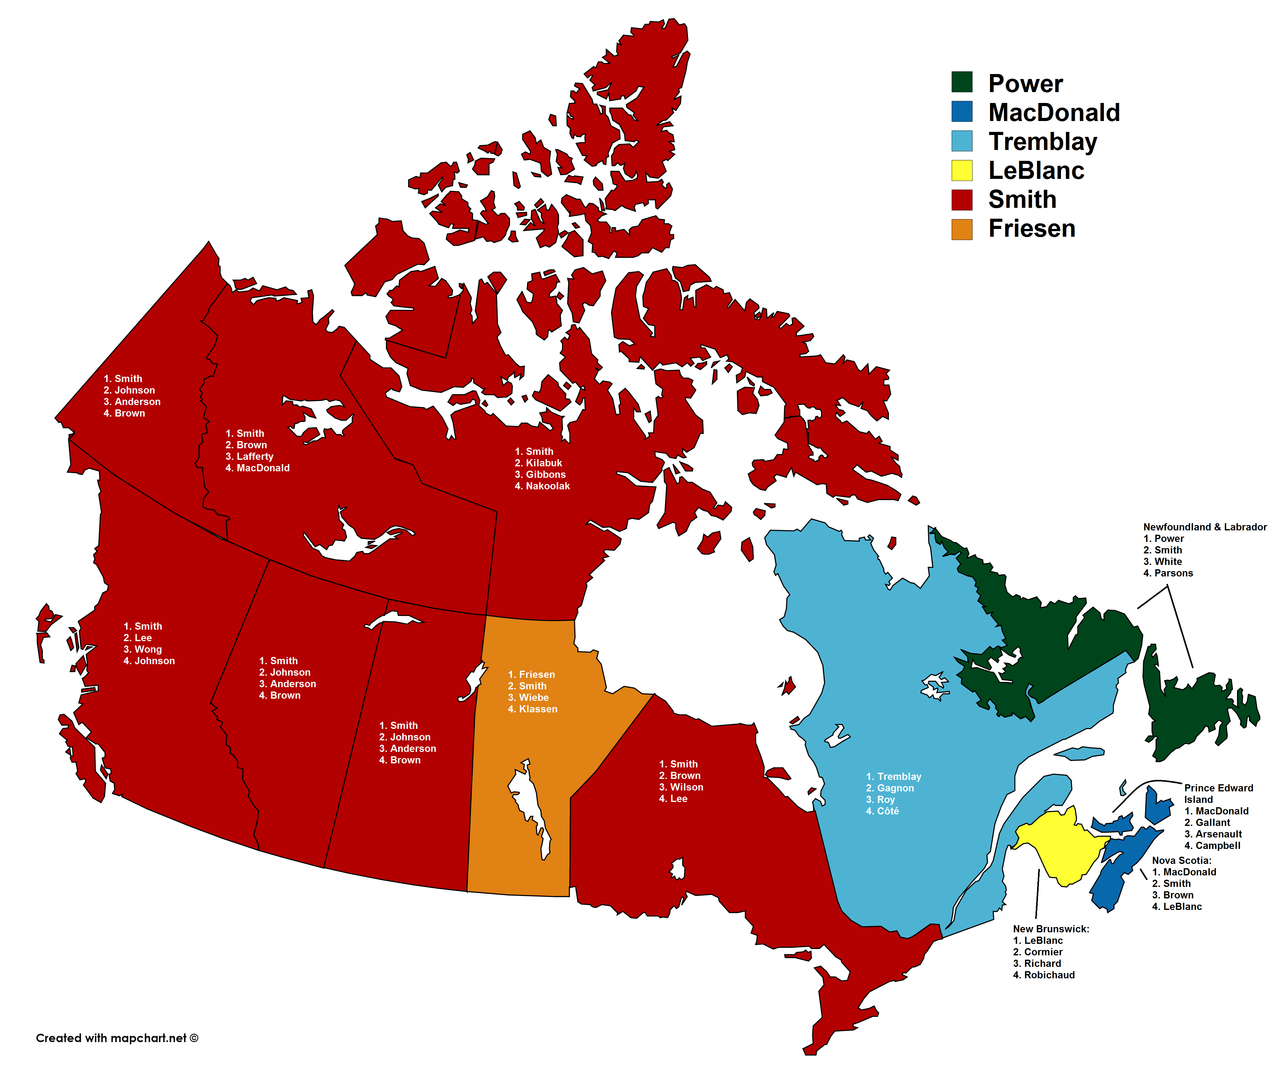 What are the most common last names in Canada?